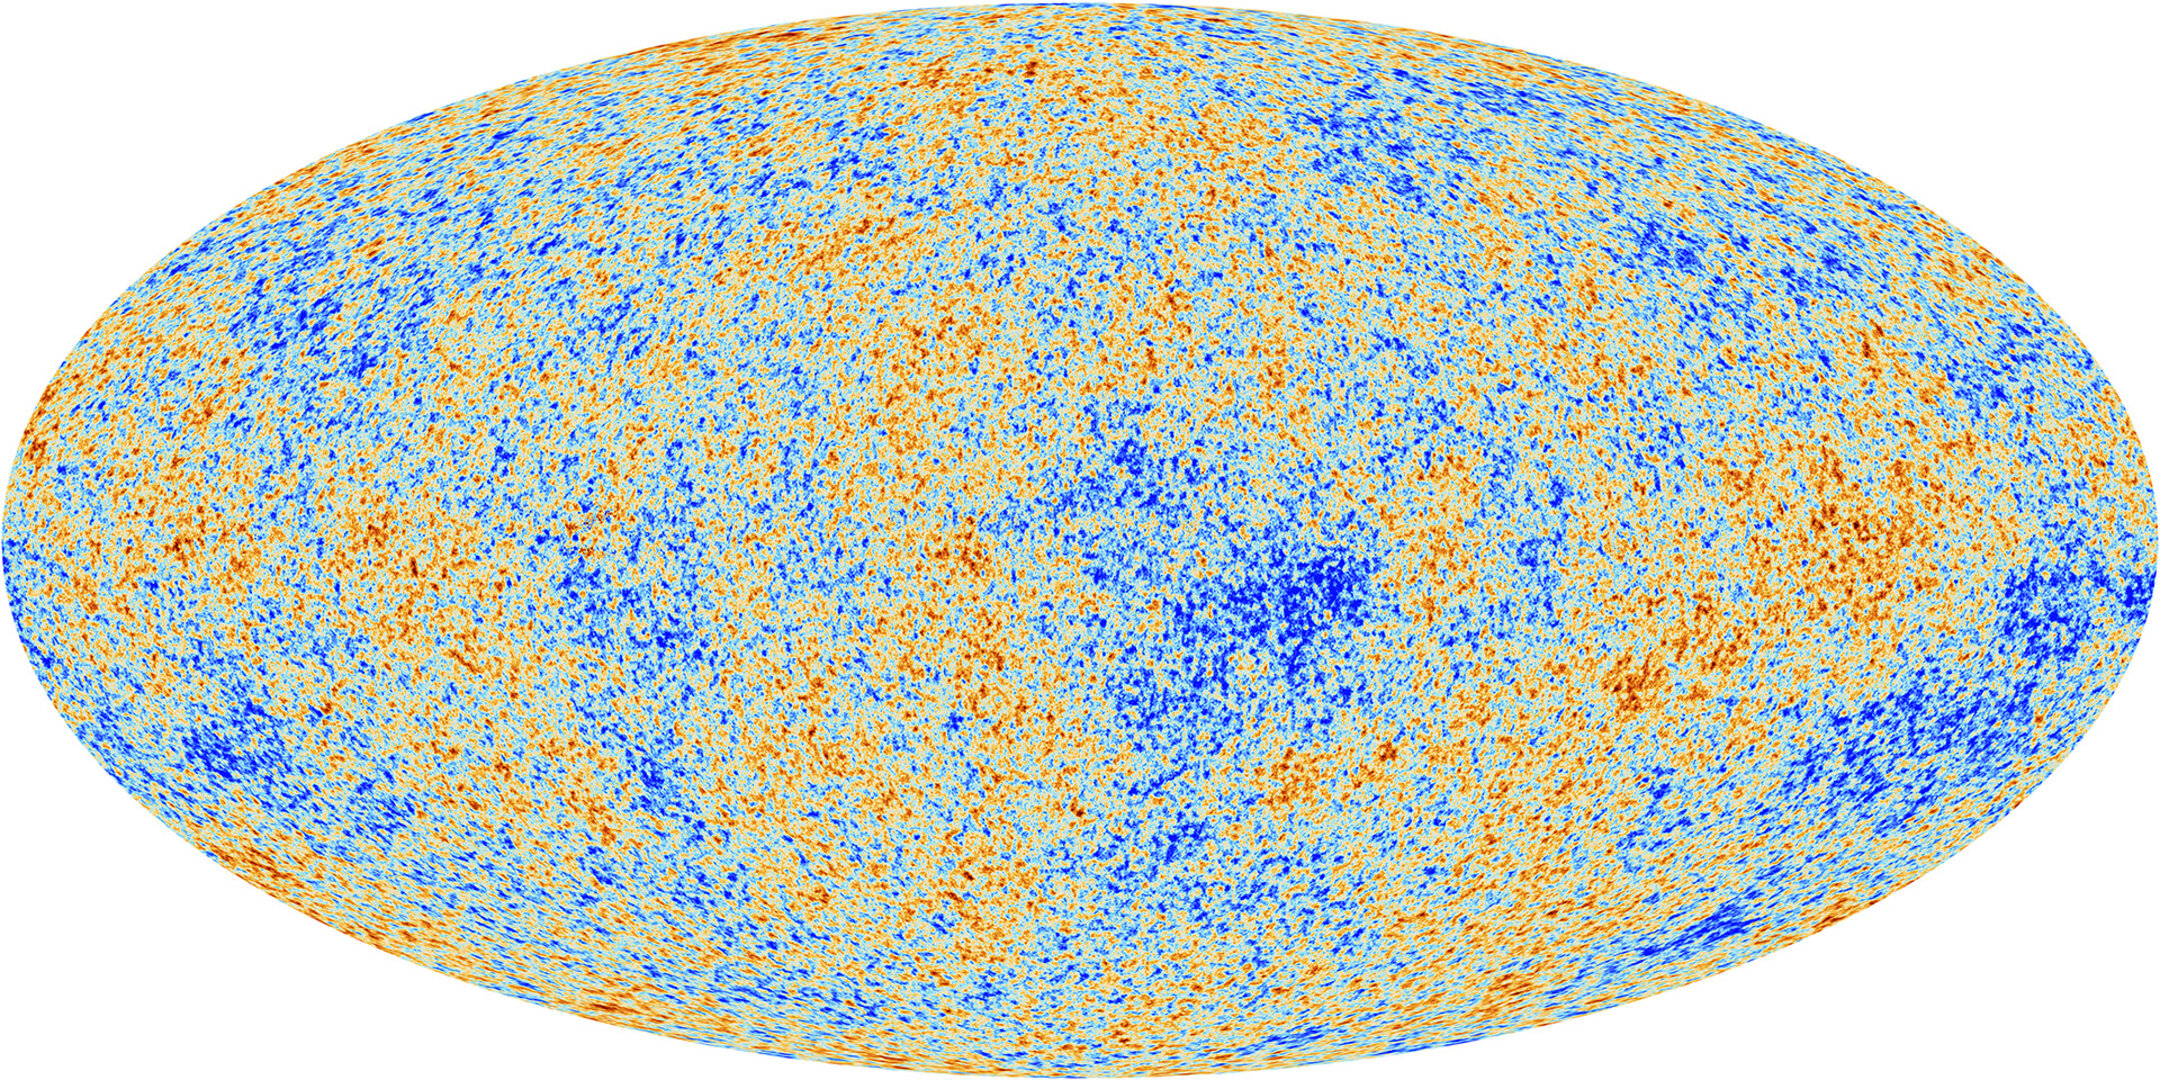 The cosmic microwave background: The universe's 'baby picture' taken by the European Space Agency's Planck satellite